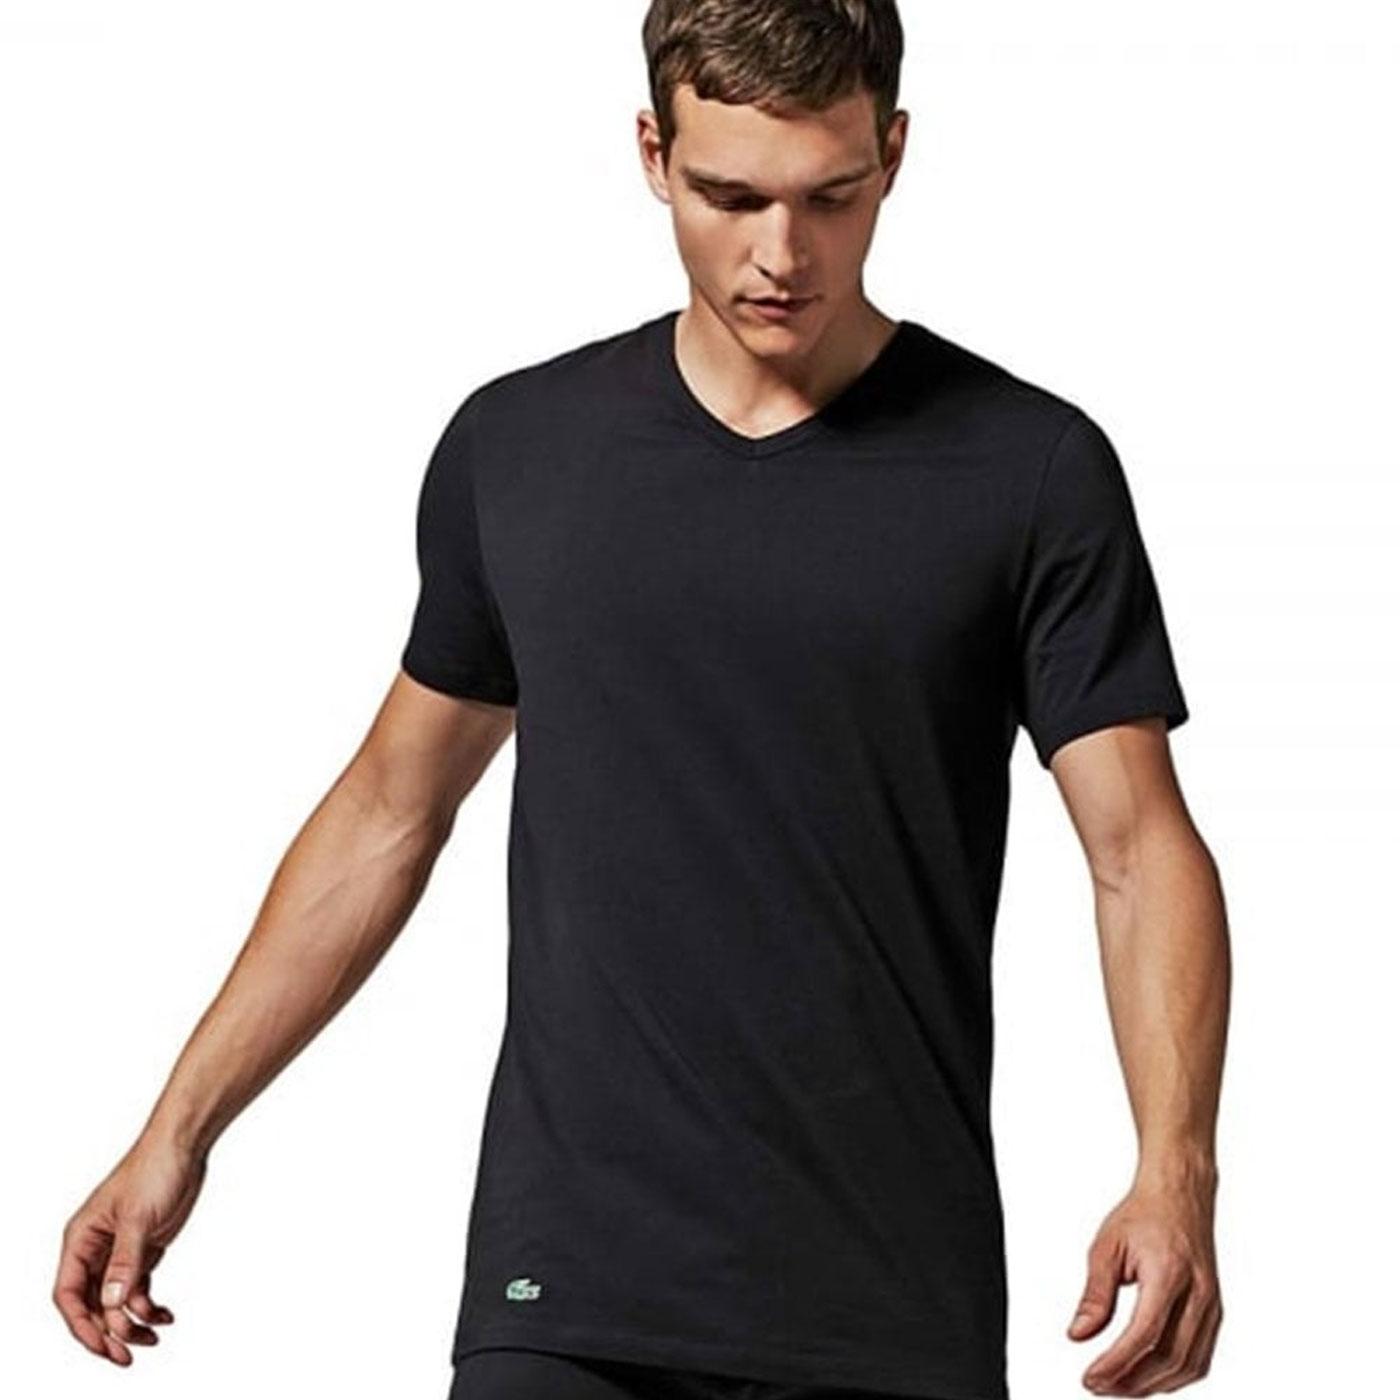 lacoste 2 pack t shirt